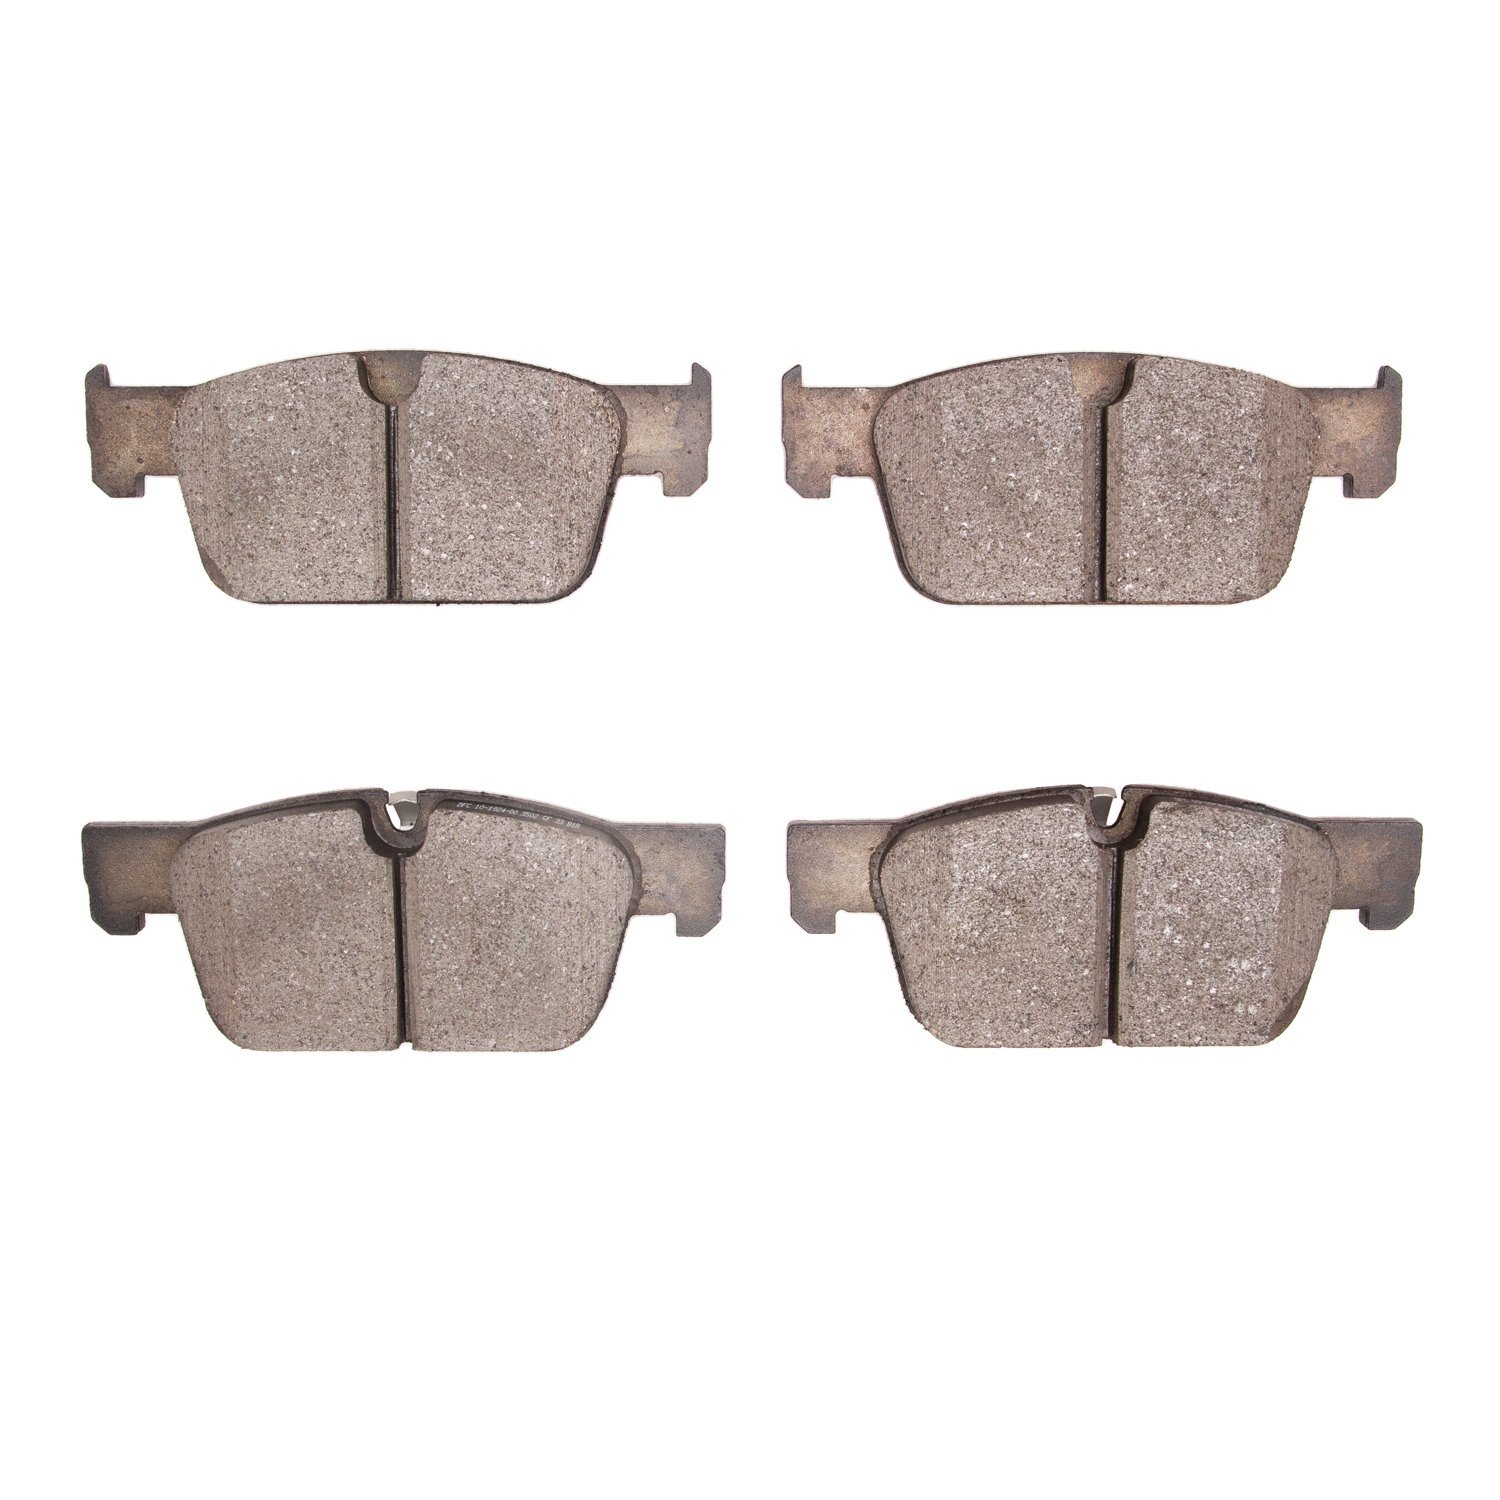 1310-1924-00 3000-Series Ceramic Brake Pads, Fits Select Volvo, Position: Front